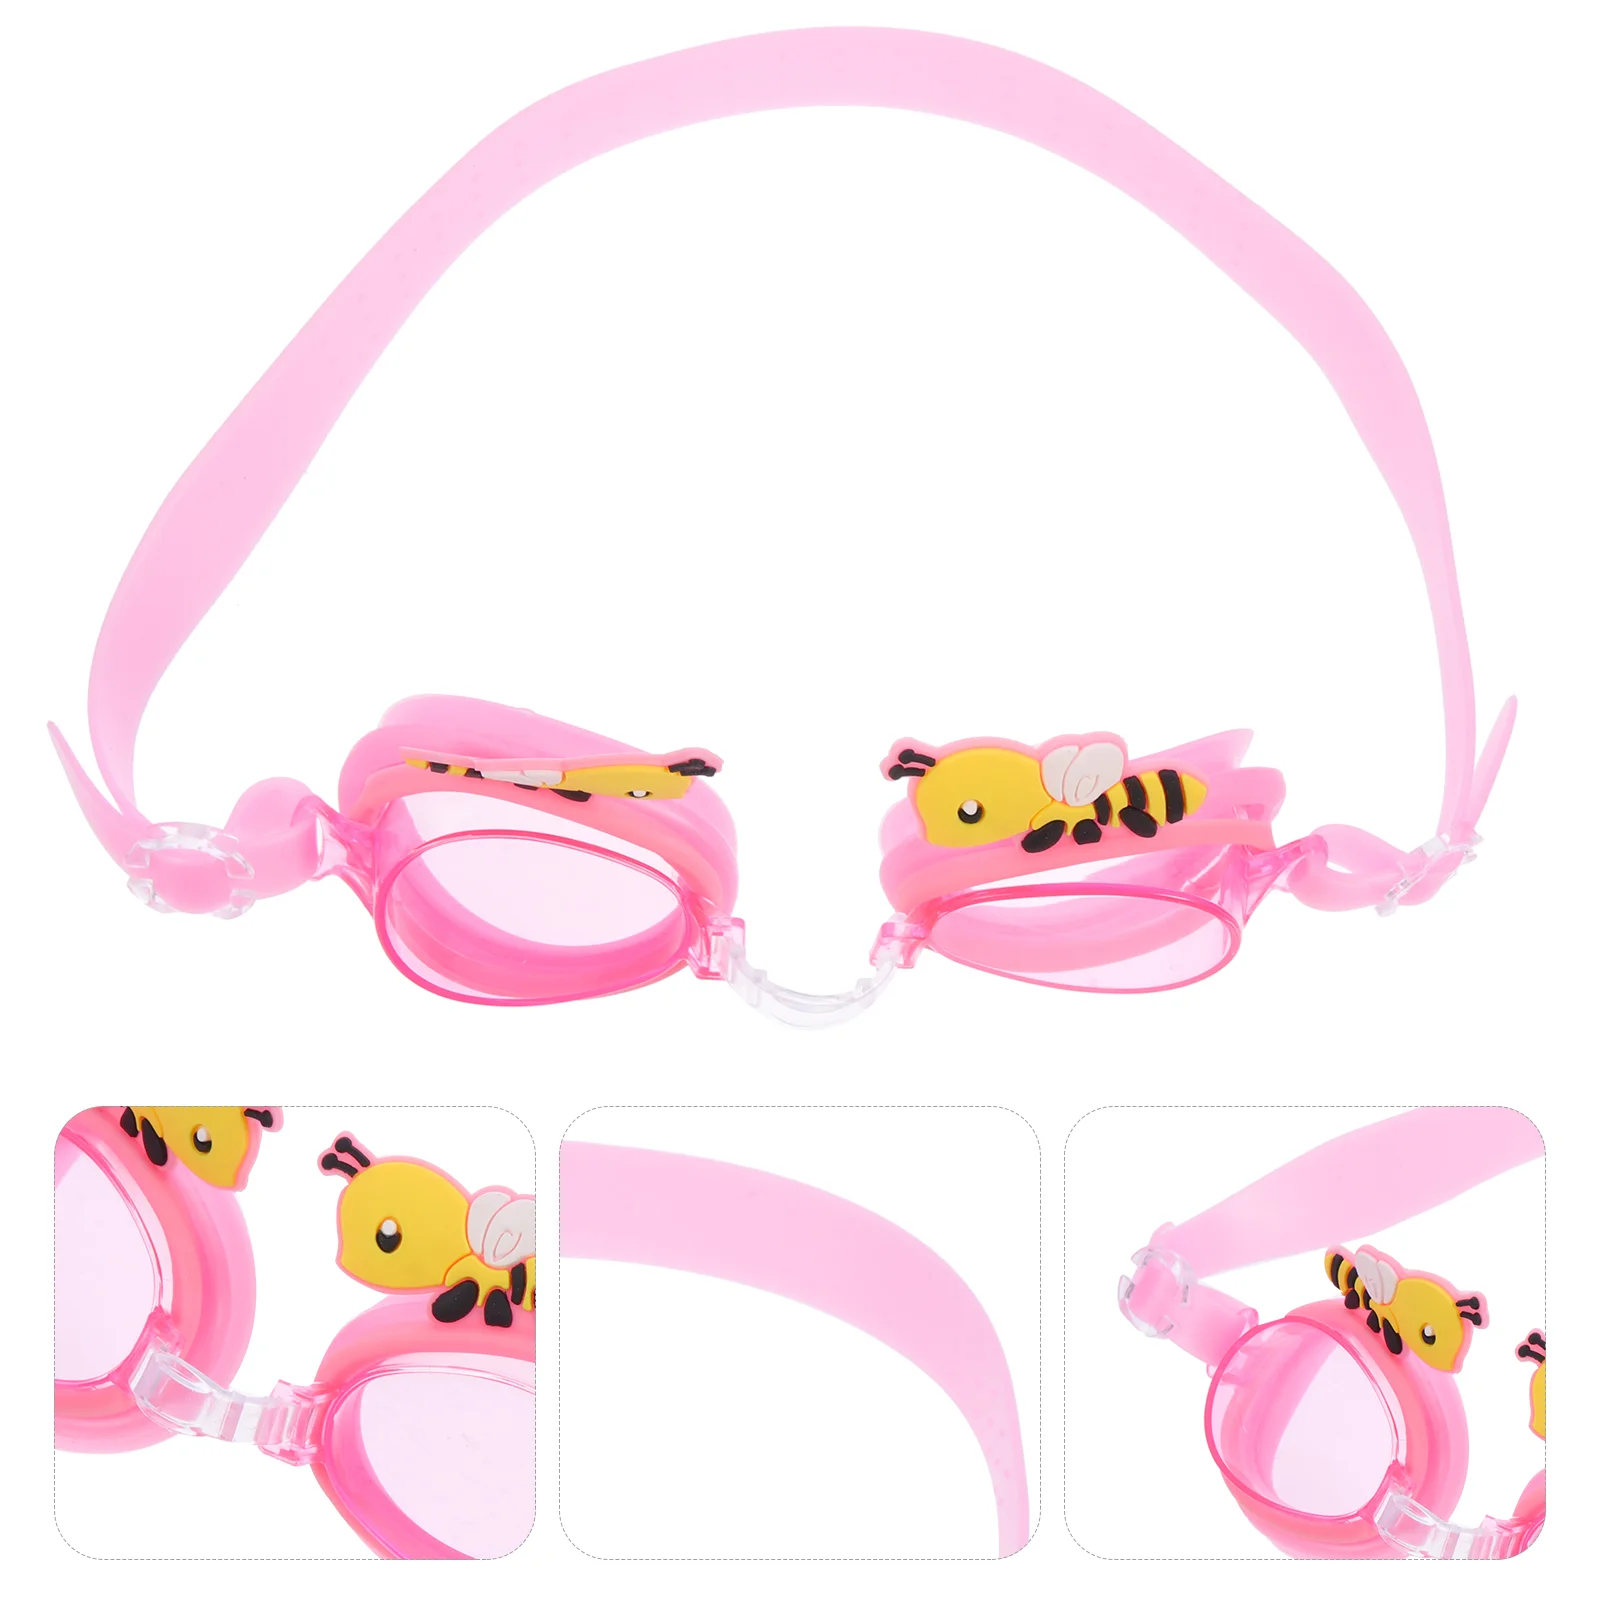 Bee Swimming Goggles Swimming Goggless for Toddlers Cartoon Universal Anti Fog Lightweight Kids Portable Silica Gel Supply ice skates kids portable blade guard professional protectors shoes hockey guards silica gel skating child covers